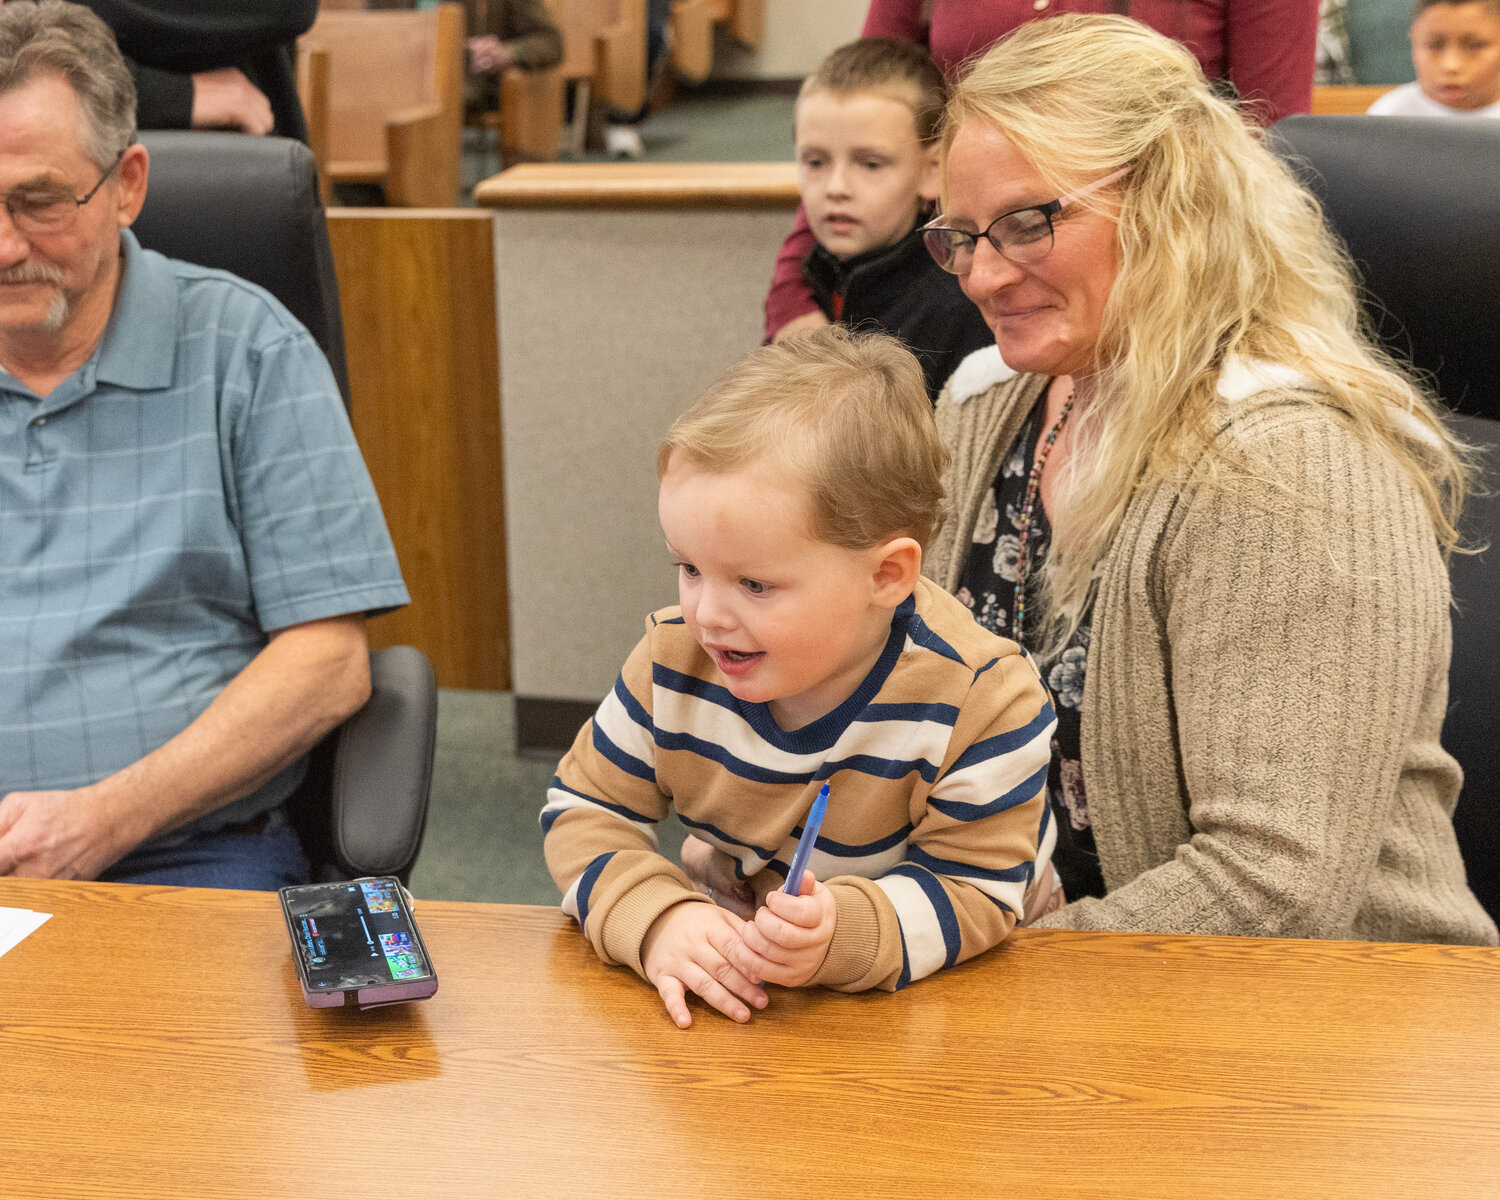 William and Stacy Burleson prepare to sign adoption paperwork on Friday in Chehalis.